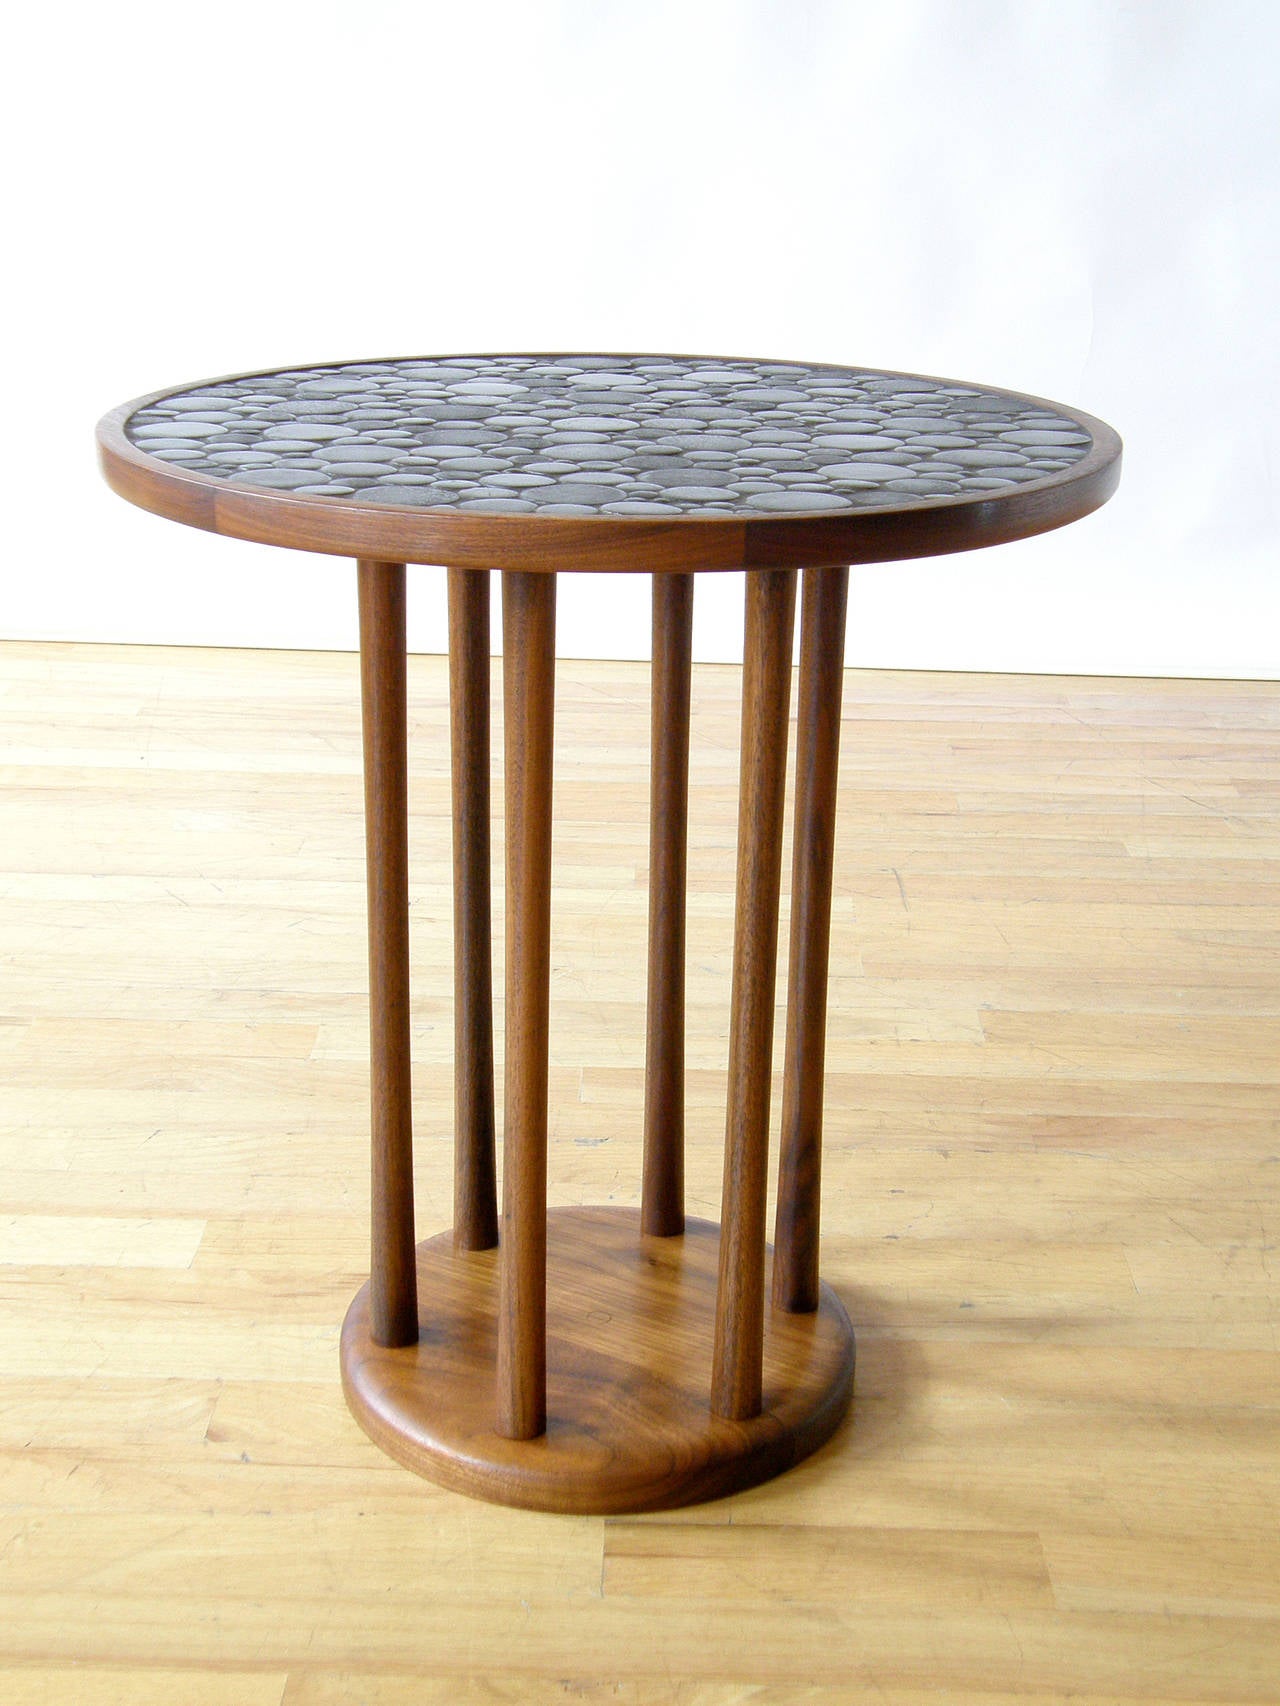 Tile top side table by Jane and Gordon Martz for Marshall Studios.

Please use Contact Dealer button if you have any questions.